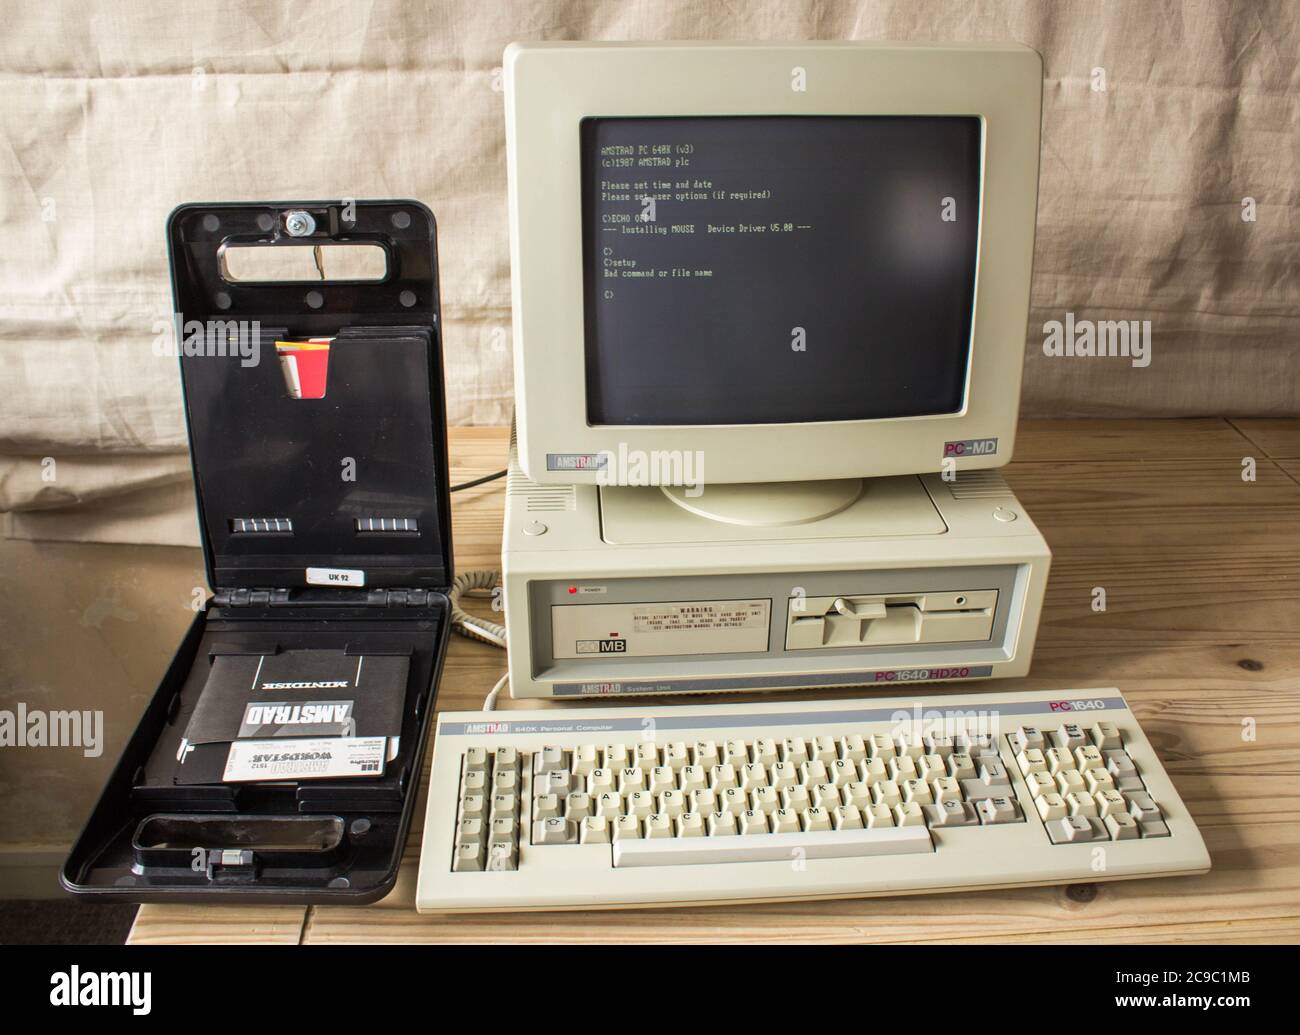 Vintage Amstrad PC1640HD20, Historical Computer on Desk with Box of 3.5 inch Sized Floppy Disks. Stock Photo